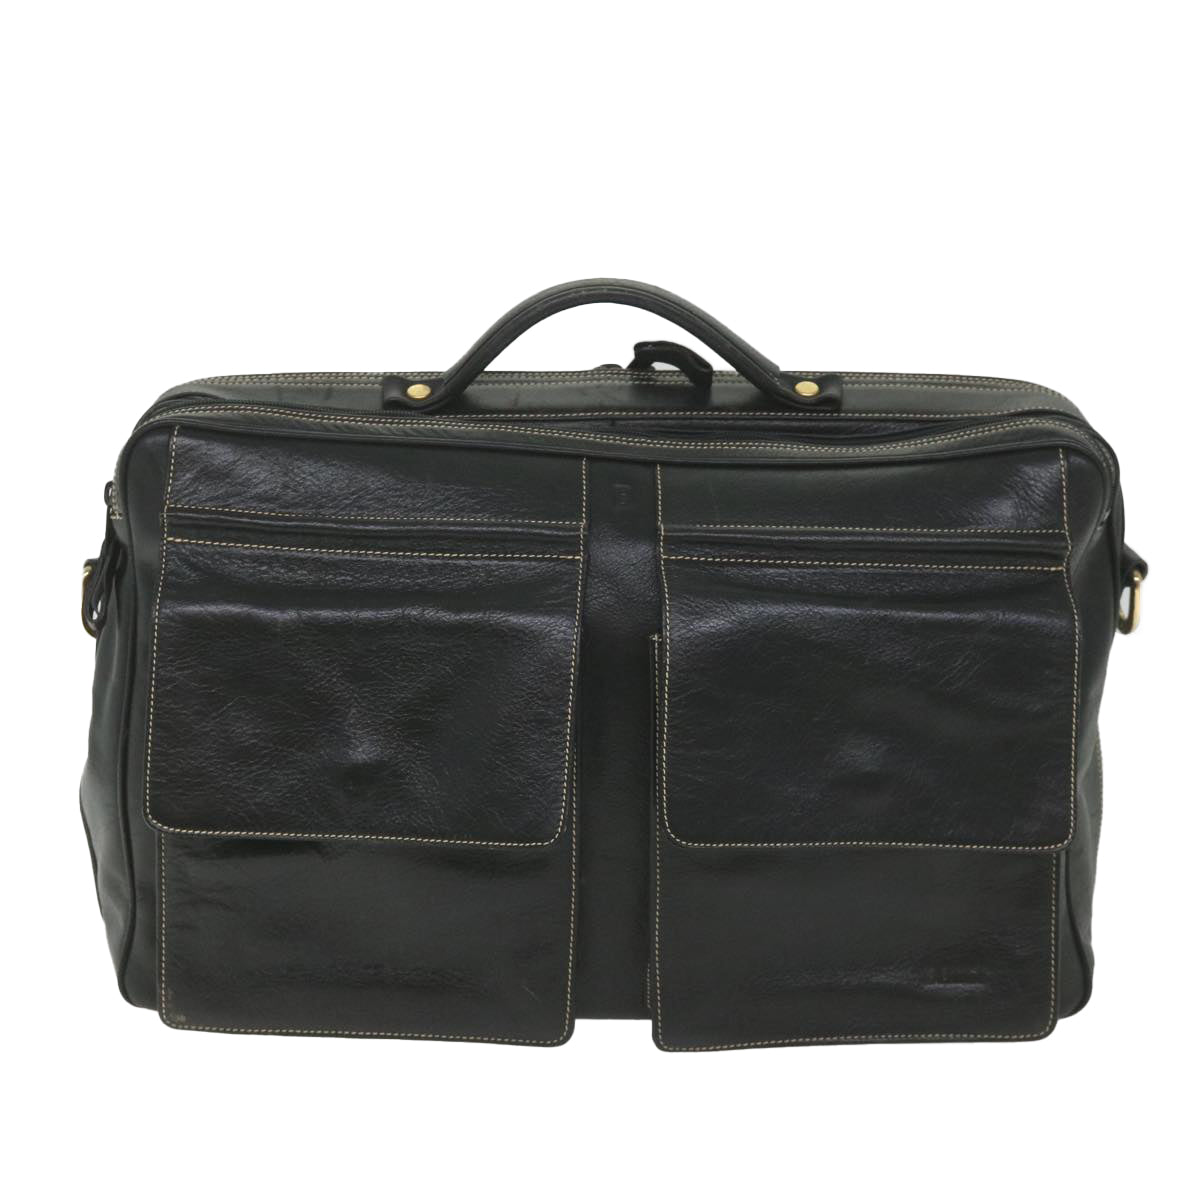 BALLY Business Bag Leather Black Auth bs9840